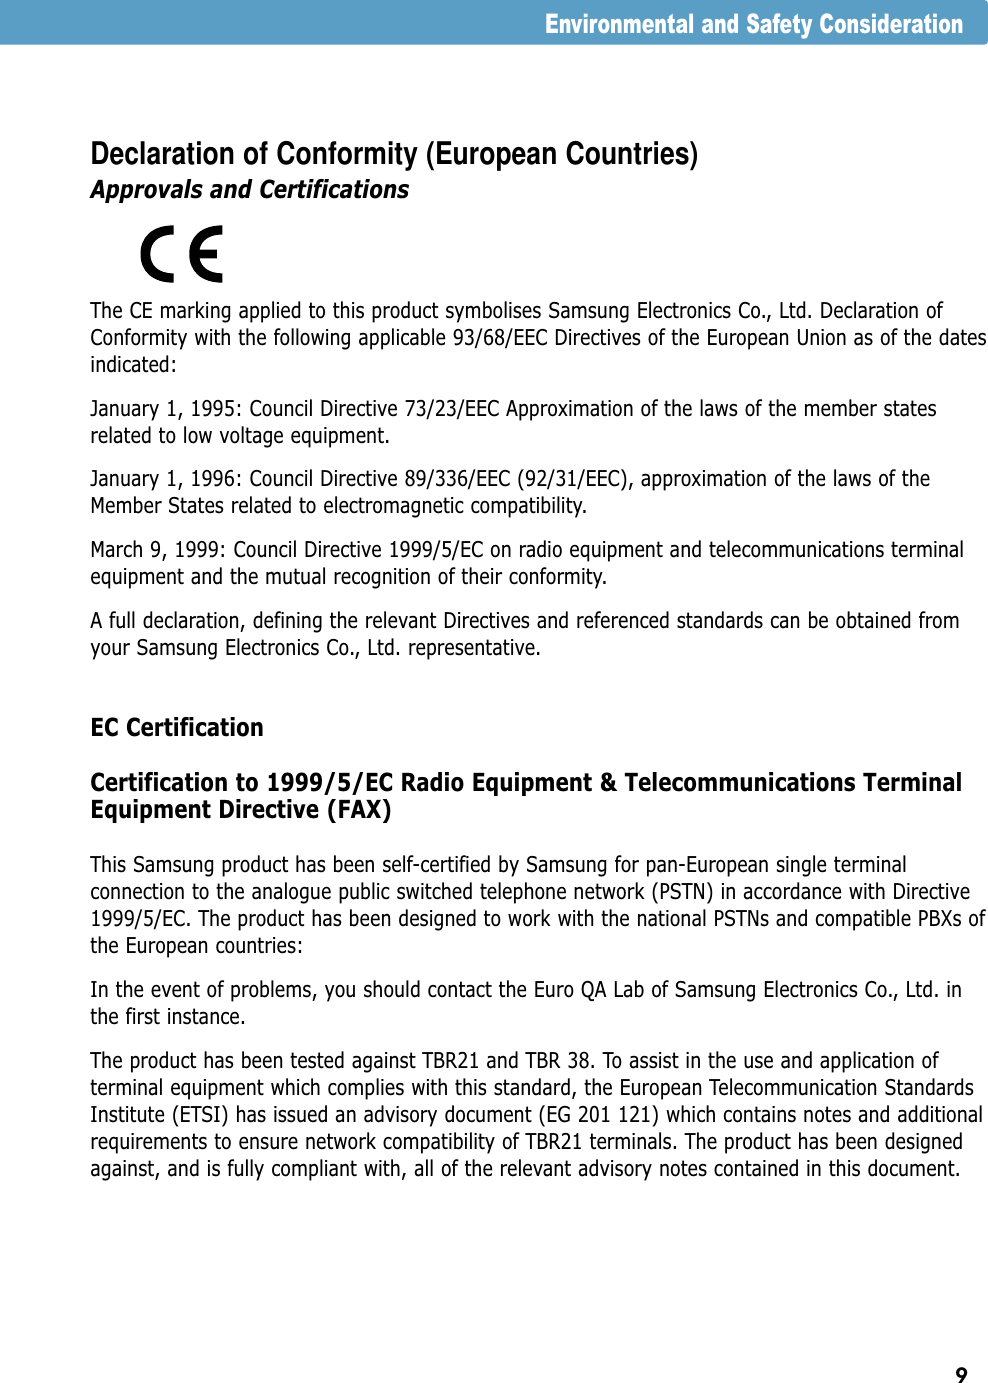 9Declaration of Conformity (European Countries)Approvals and CertificationsThe CE marking applied to this product symbolises Samsung Electronics Co., Ltd. Declaration ofConformity with the following applicable 93/68/EEC Directives of the European Union as of the datesindicated:January 1, 1995: Council Directive 73/23/EEC Approximation of the laws of the member statesrelated to low voltage equipment.January 1, 1996: Council Directive 89/336/EEC (92/31/EEC), approximation of the laws of theMember States related to electromagnetic compatibility.March 9, 1999: Council Directive 1999/5/EC on radio equipment and telecommunications terminalequipment and the mutual recognition of their conformity.A full declaration, defining the relevant Directives and referenced standards can be obtained fromyour Samsung Electronics Co., Ltd. representative.EC CertificationCertification to 1999/5/EC Radio Equipment &amp; Telecommunications TerminalEquipment Directive (FAX)This Samsung product has been self-certified by Samsung for pan-European single terminalconnection to the analogue public switched telephone network (PSTN) in accordance with Directive1999/5/EC. The product has been designed to work with the national PSTNs and compatible PBXs ofthe European countries:In the event of problems, you should contact the Euro QA Lab of Samsung Electronics Co., Ltd. inthe first instance.The product has been tested against TBR21 and TBR 38. To assist in the use and application ofterminal equipment which complies with this standard, the European Telecommunication StandardsInstitute (ETSI) has issued an advisory document (EG 201 121) which contains notes and additionalrequirements to ensure network compatibility of TBR21 terminals. The product has been designedagainst, and is fully compliant with, all of the relevant advisory notes contained in this document.Environmental and Safety Consideration